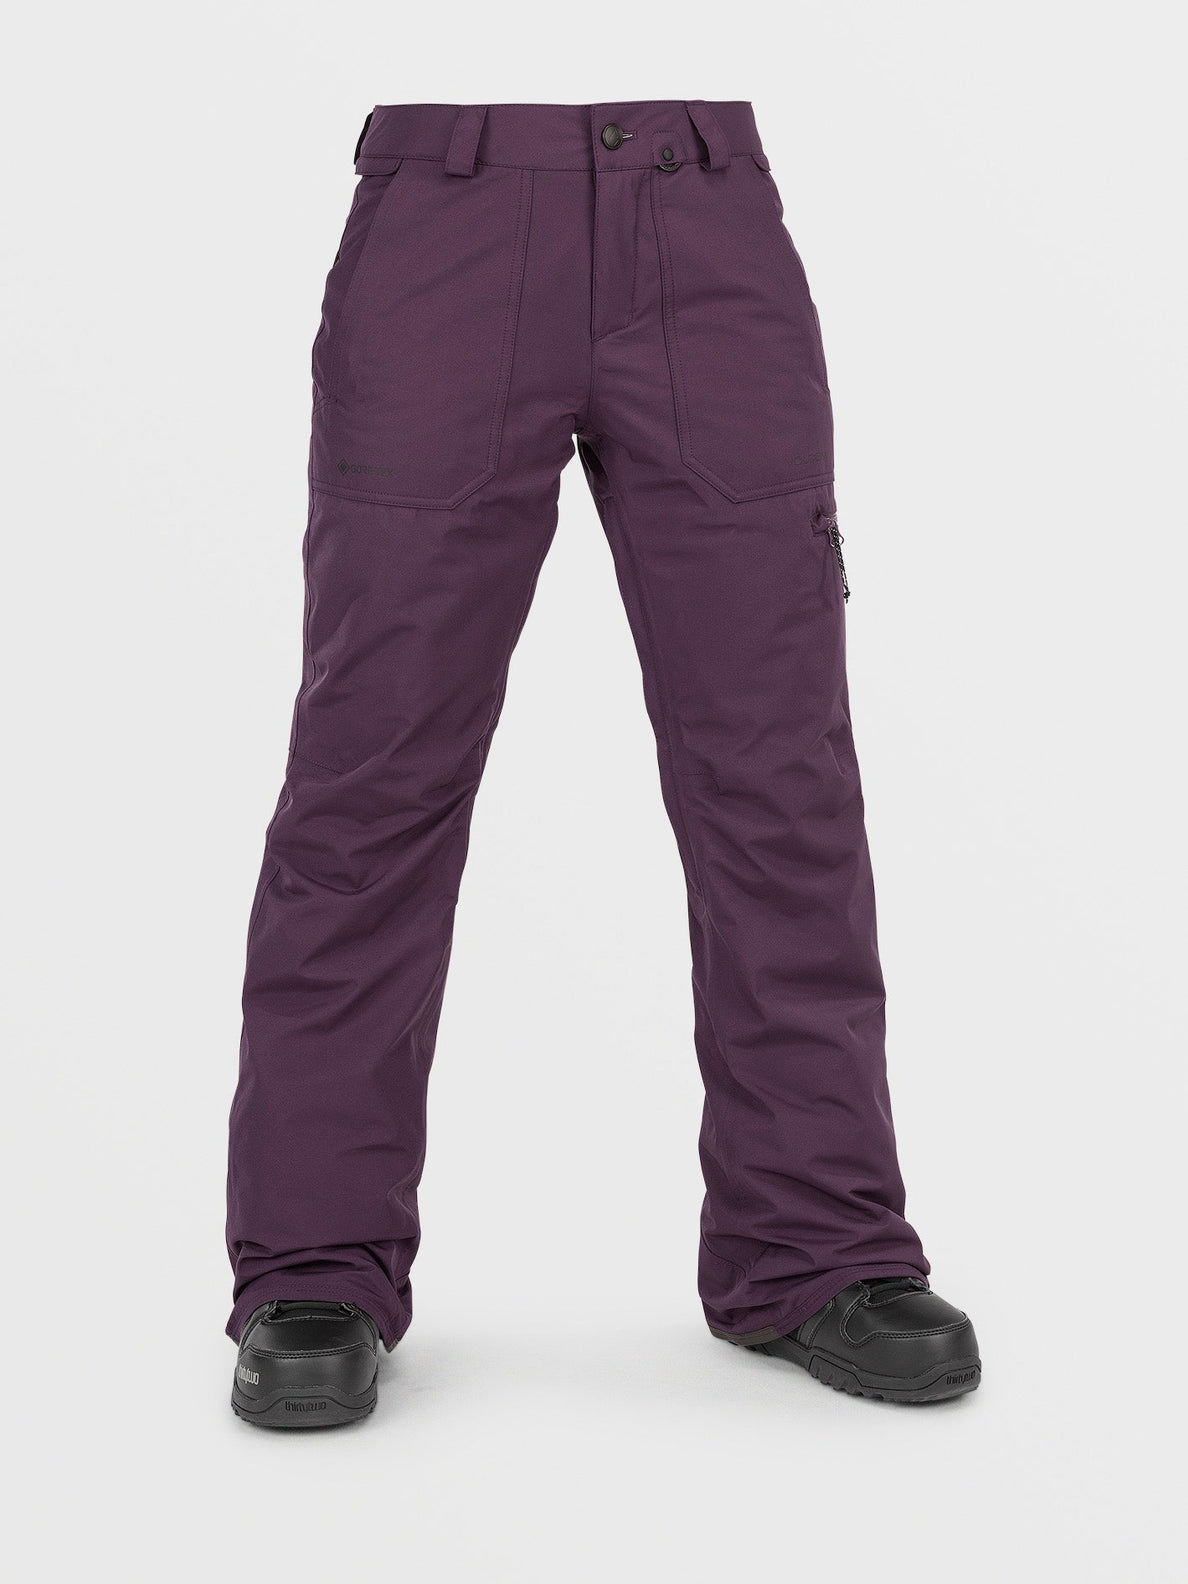 Knox Insulated Gore-Tex Trousers - BLACKBERRY (H1252400_BRY) [F]